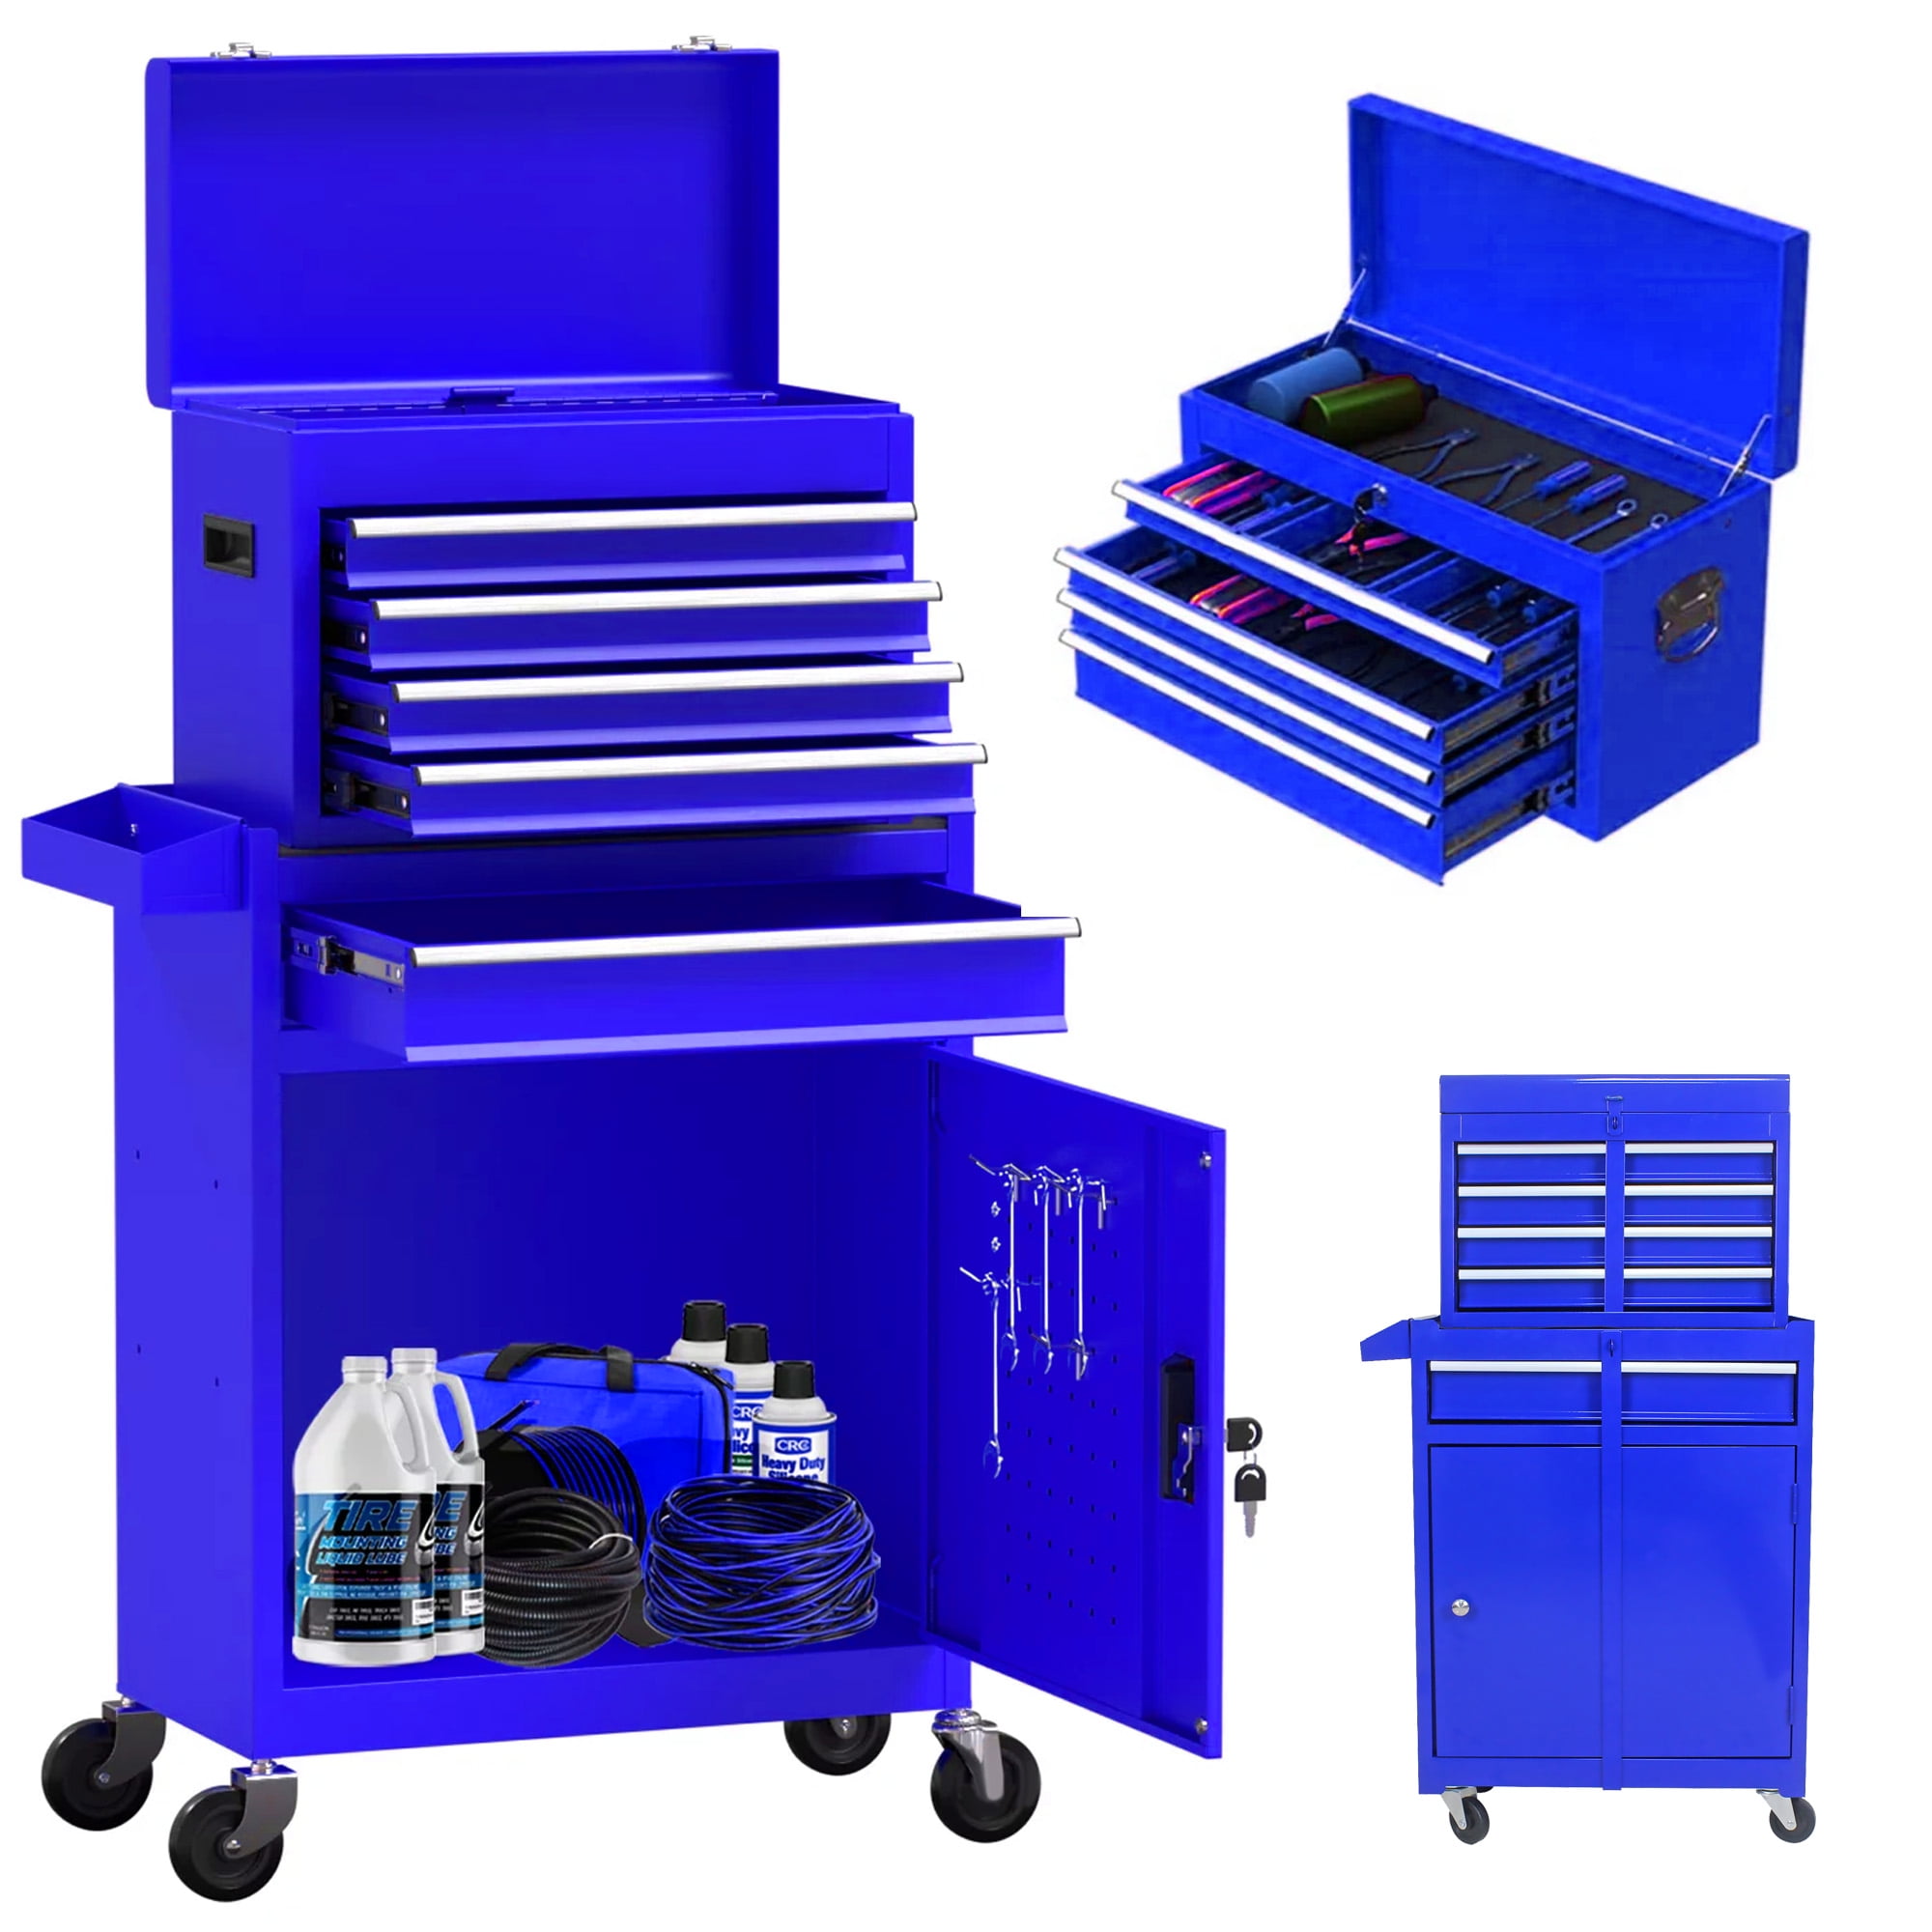 Aukfa Tool Chest, 2 in 1 Steel Rolling Tool Box & Cabinet On Wheels for Garage, 5-Drawer, Blue, Size: 22.9 inch Large x 11 inch D x 47.2 inch H